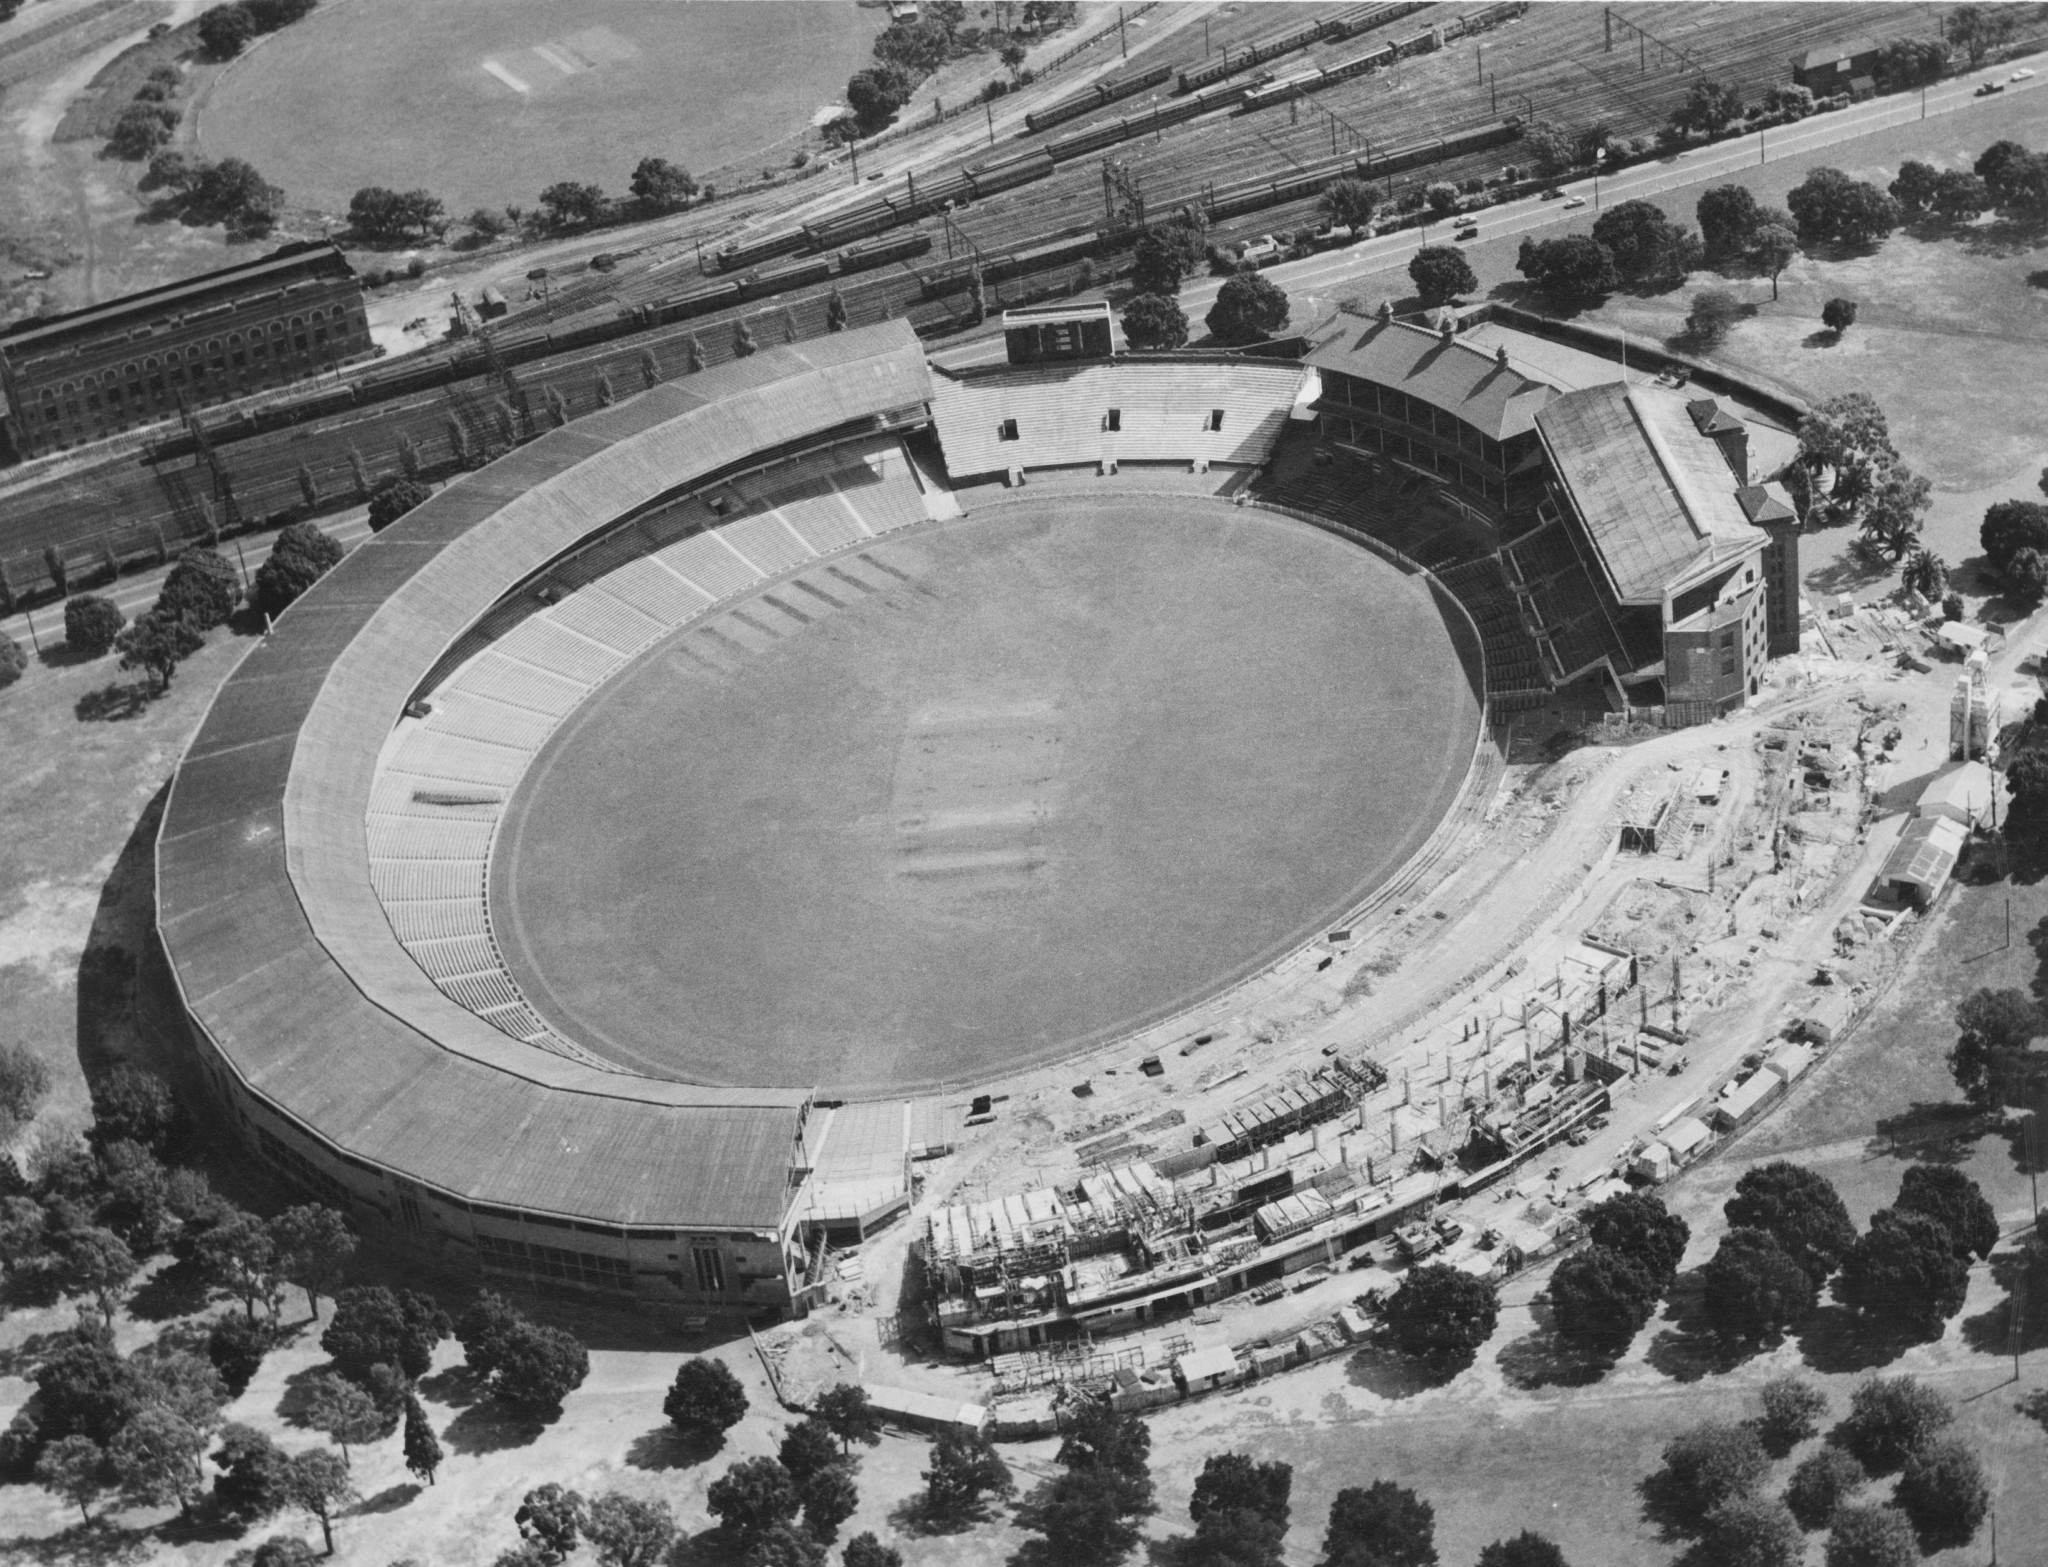 Apart from problems with quarantine regulations, there were delays in reaching agreement for the Melbourne Cricket Ground to be used for the 1956 Olympics ©Getty Images